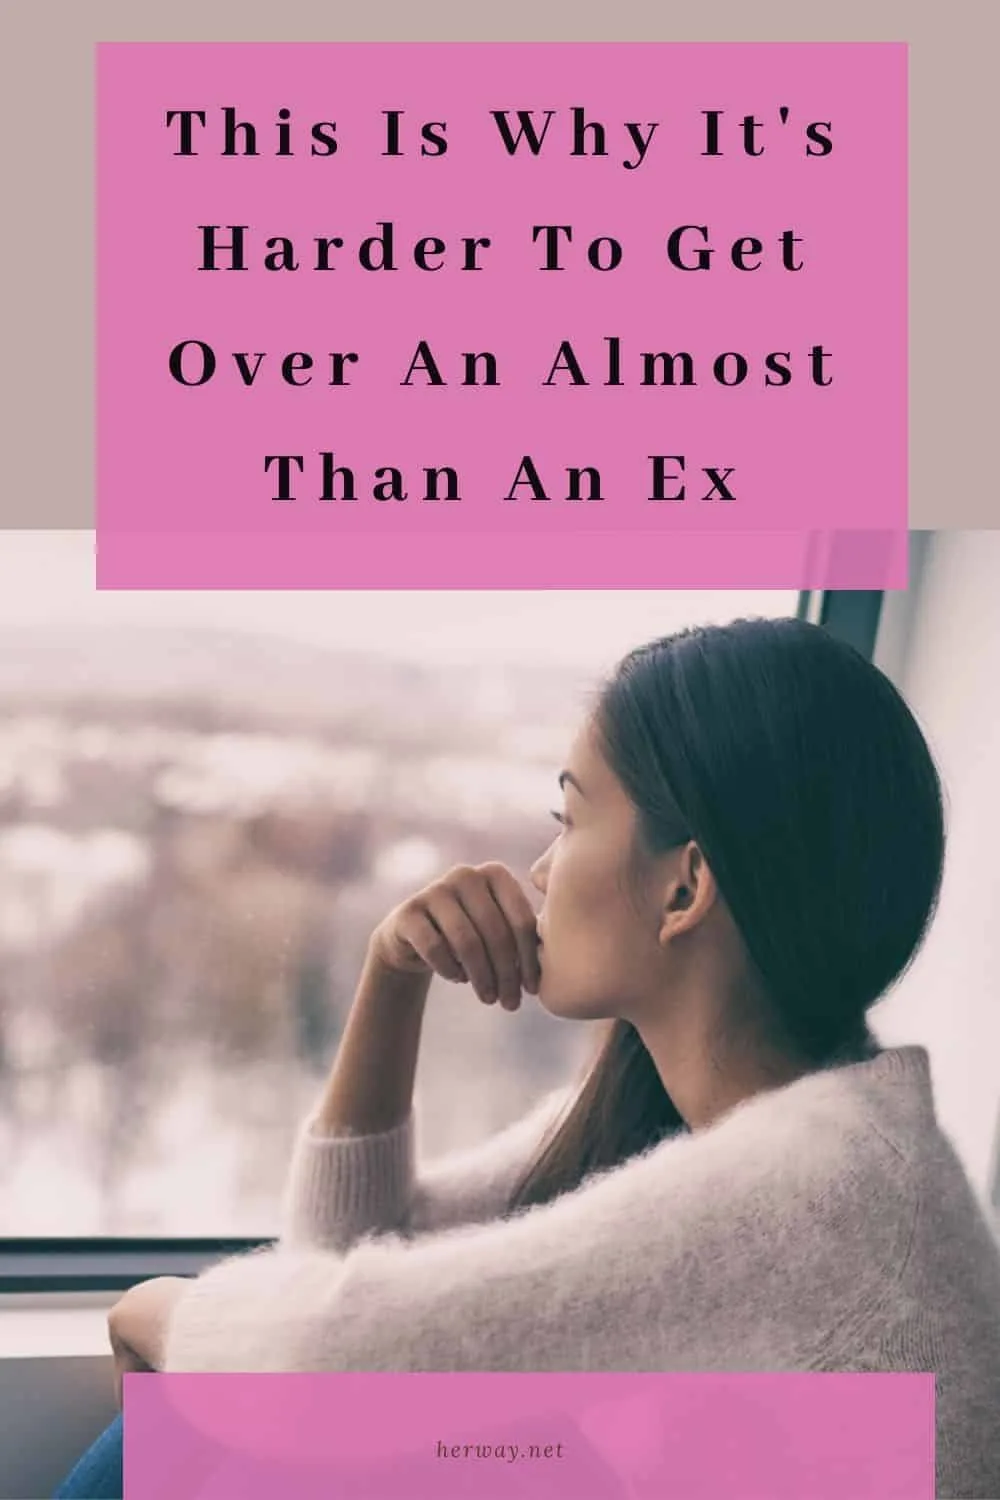 This Is Why It's Harder To Get Over An Almost Than An Ex